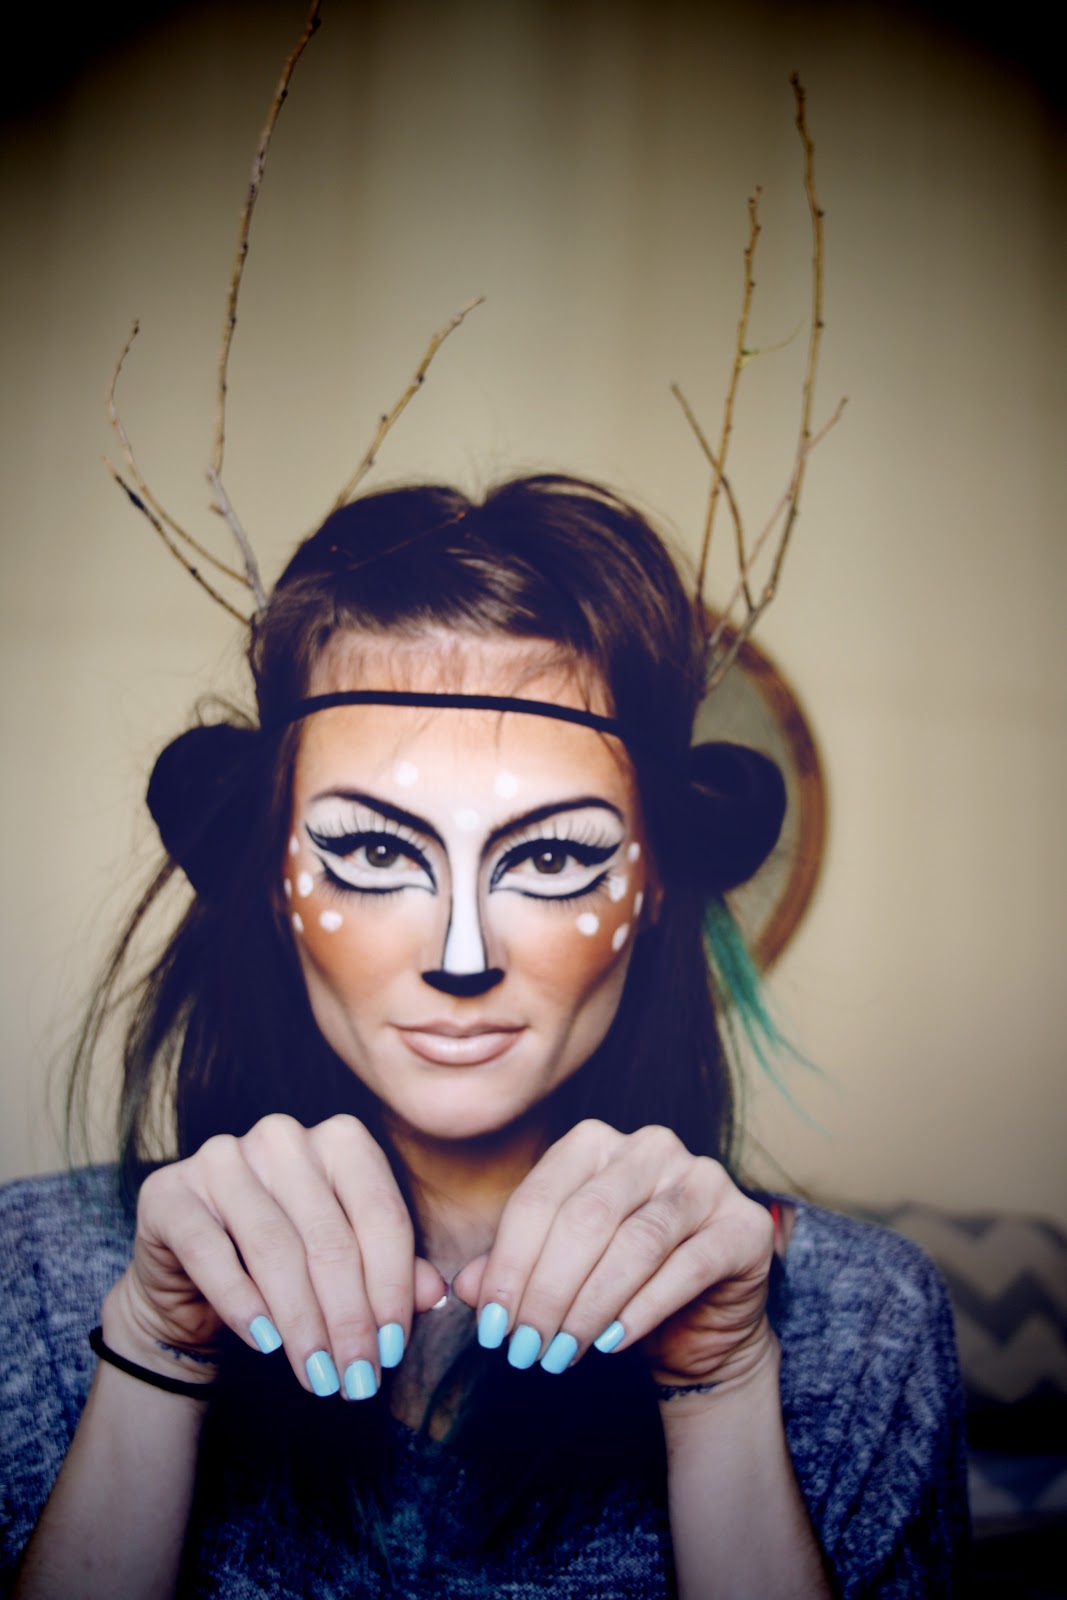 Girl with makeup for halloween as a deer